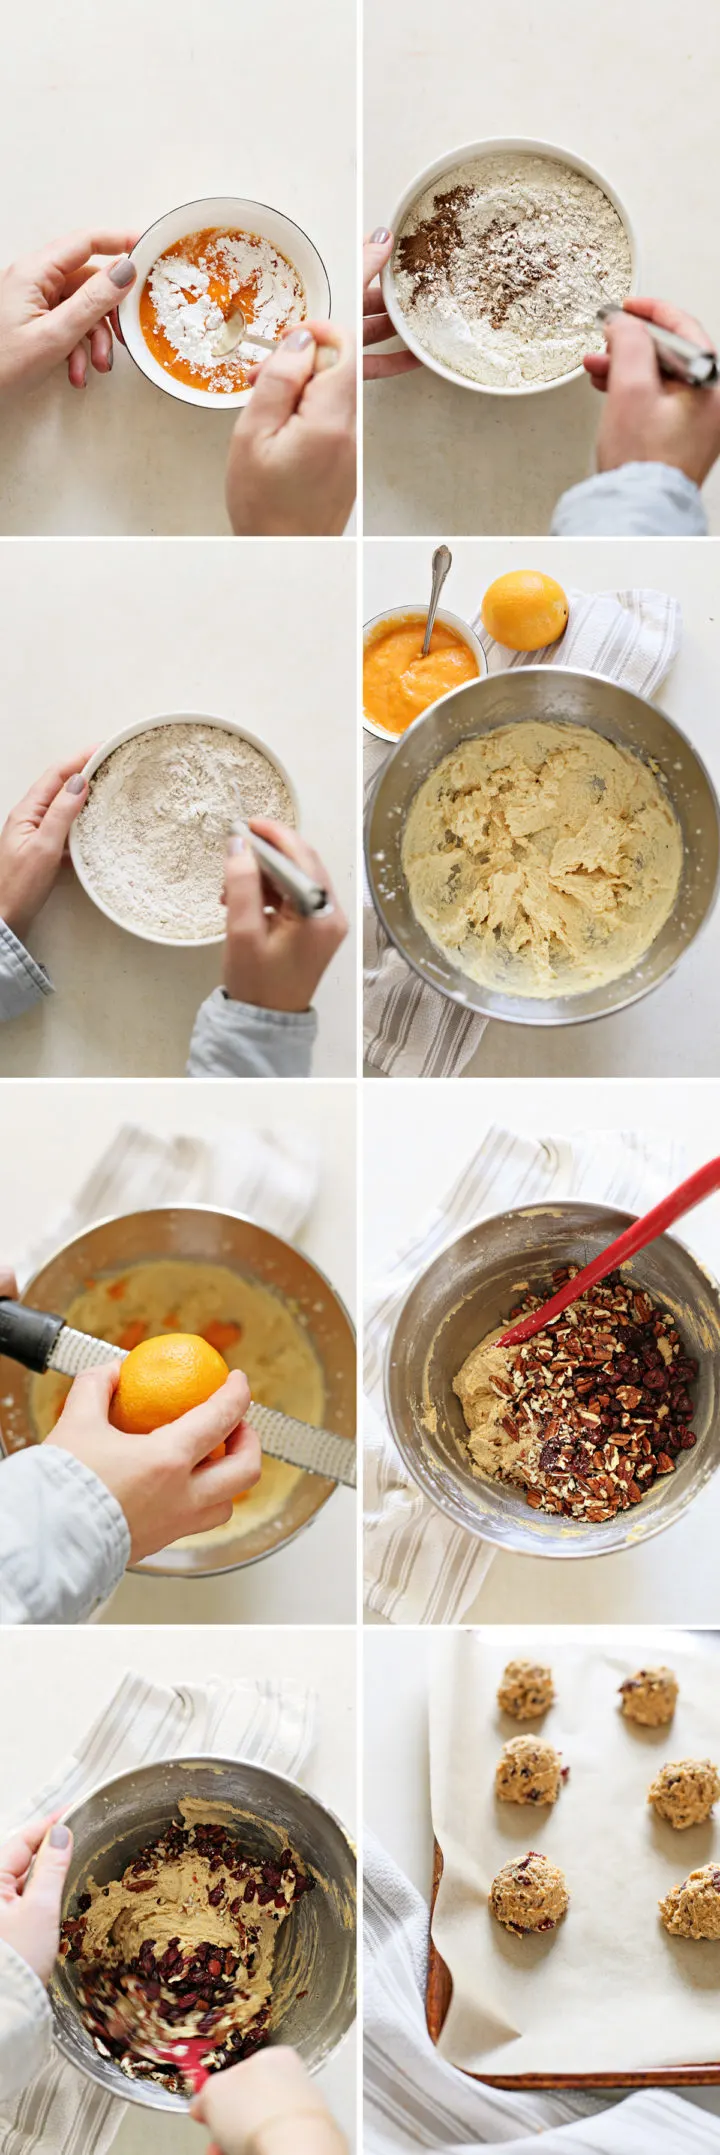 step by step photos showing how to make this recipe for persimmon cookies